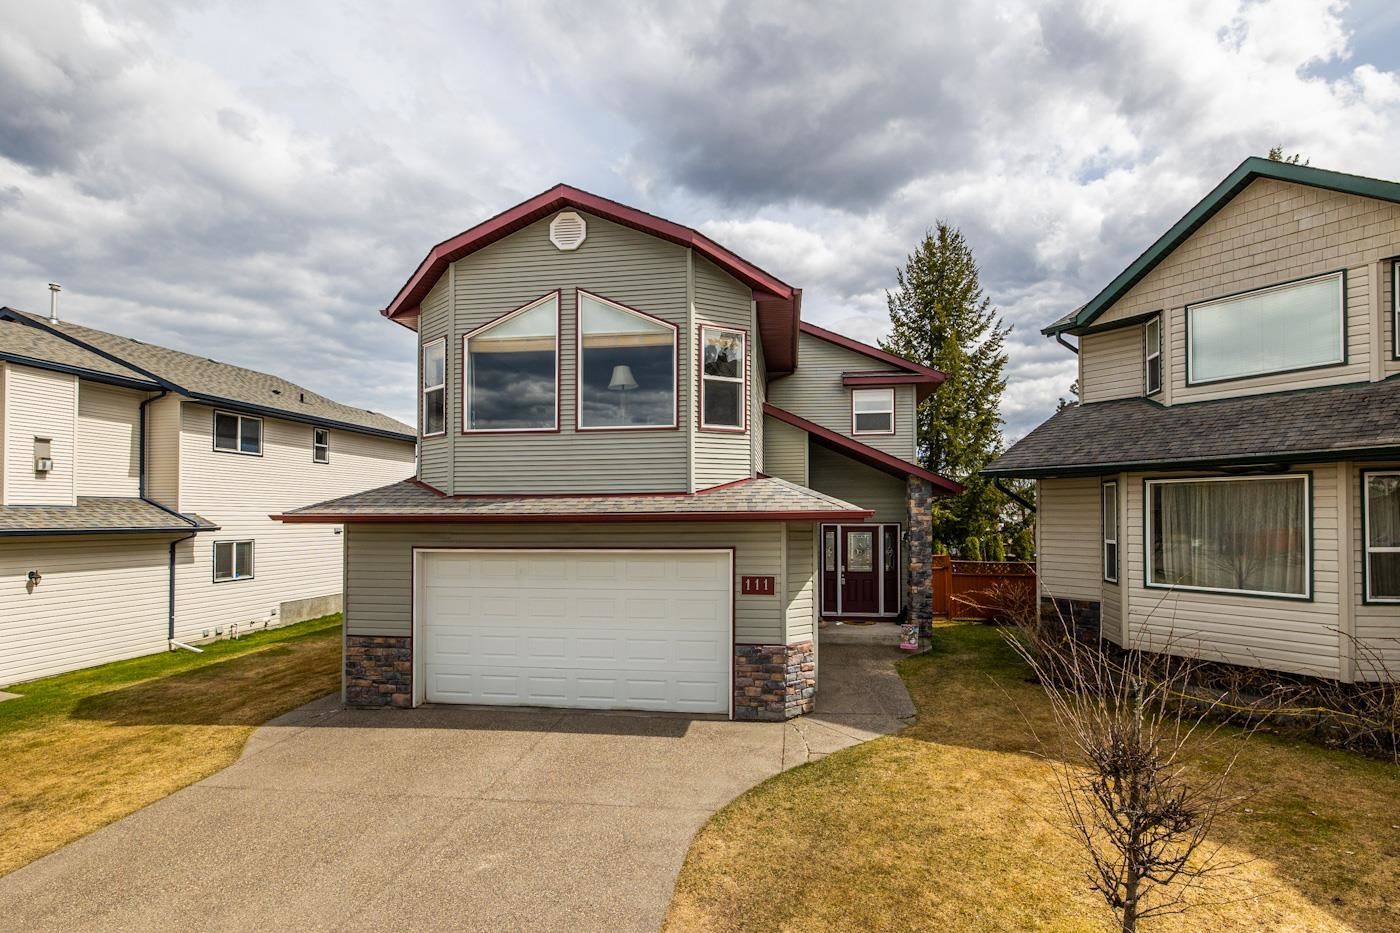 I have sold a property at 111 1299 OSPIKA BLVD N in Prince George
